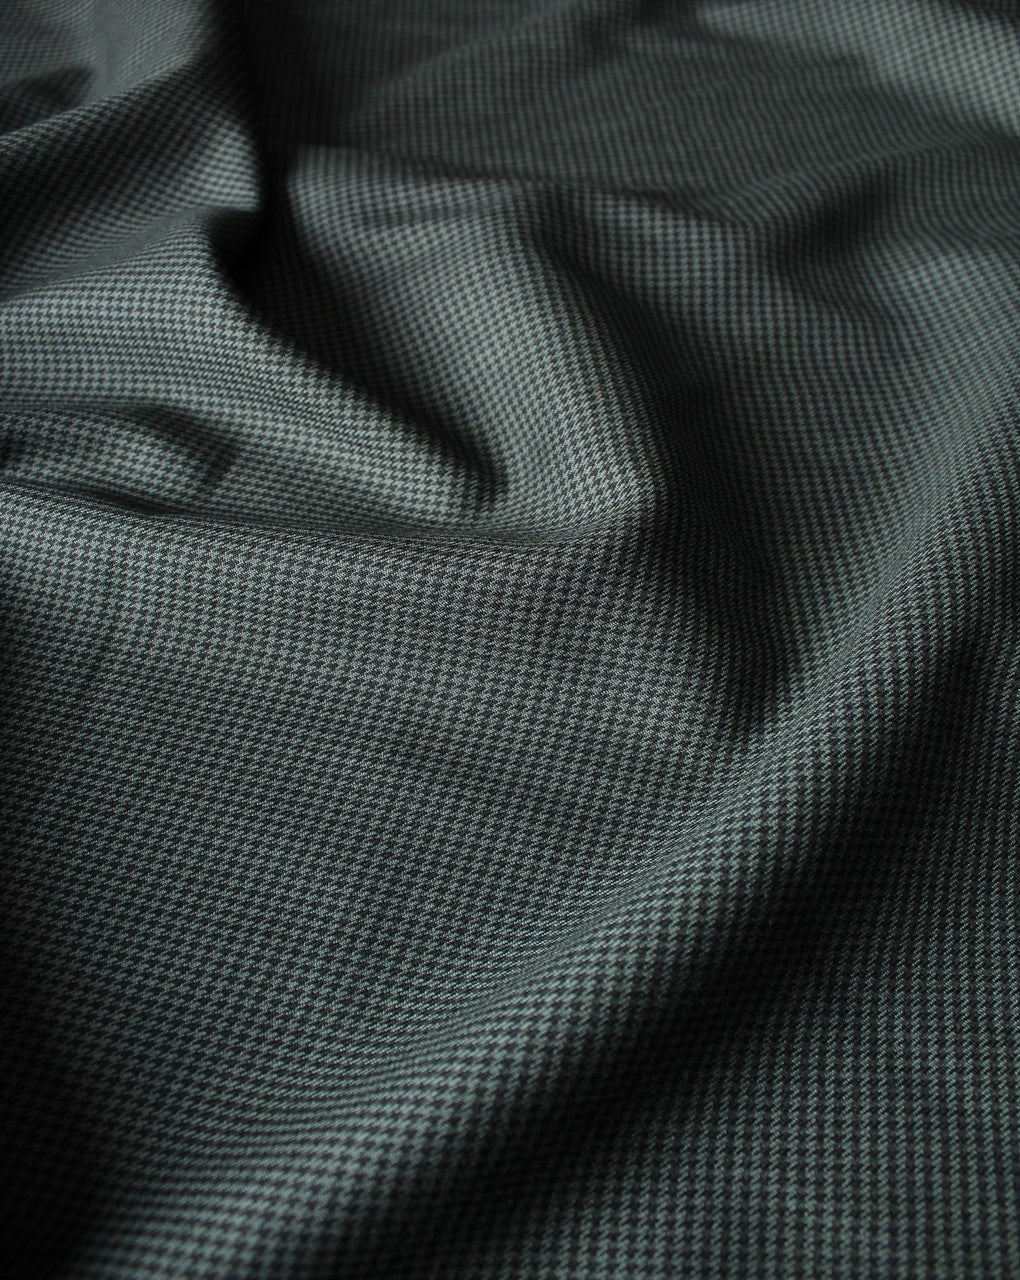 Green And Black Polyester Woolen Fabric